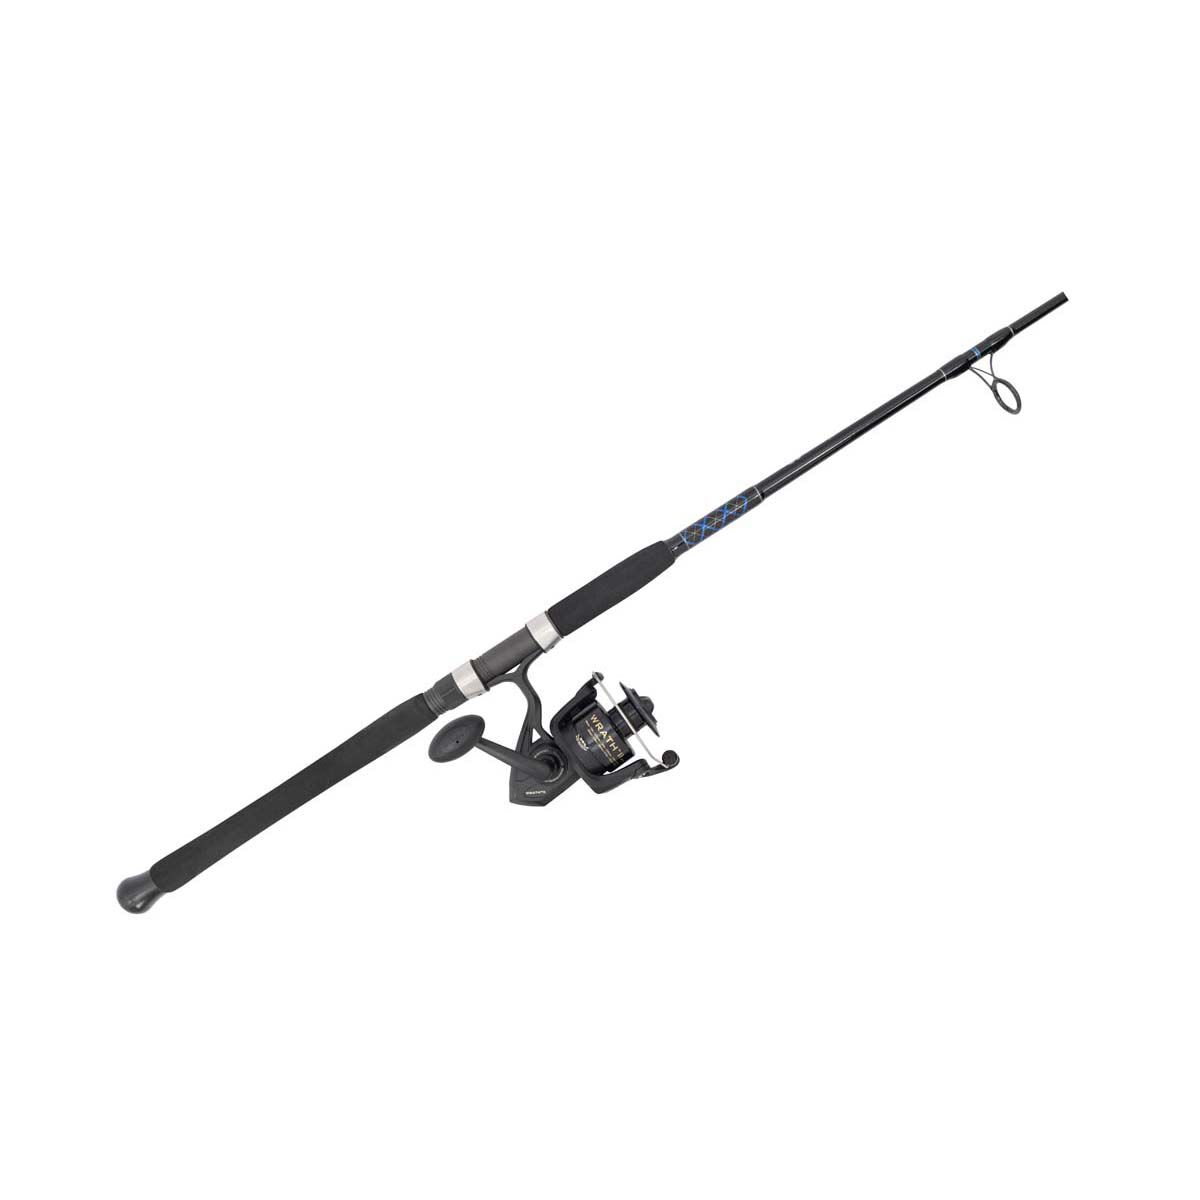 Fishing Rod Combos, Rod & Reel Combos For Sale